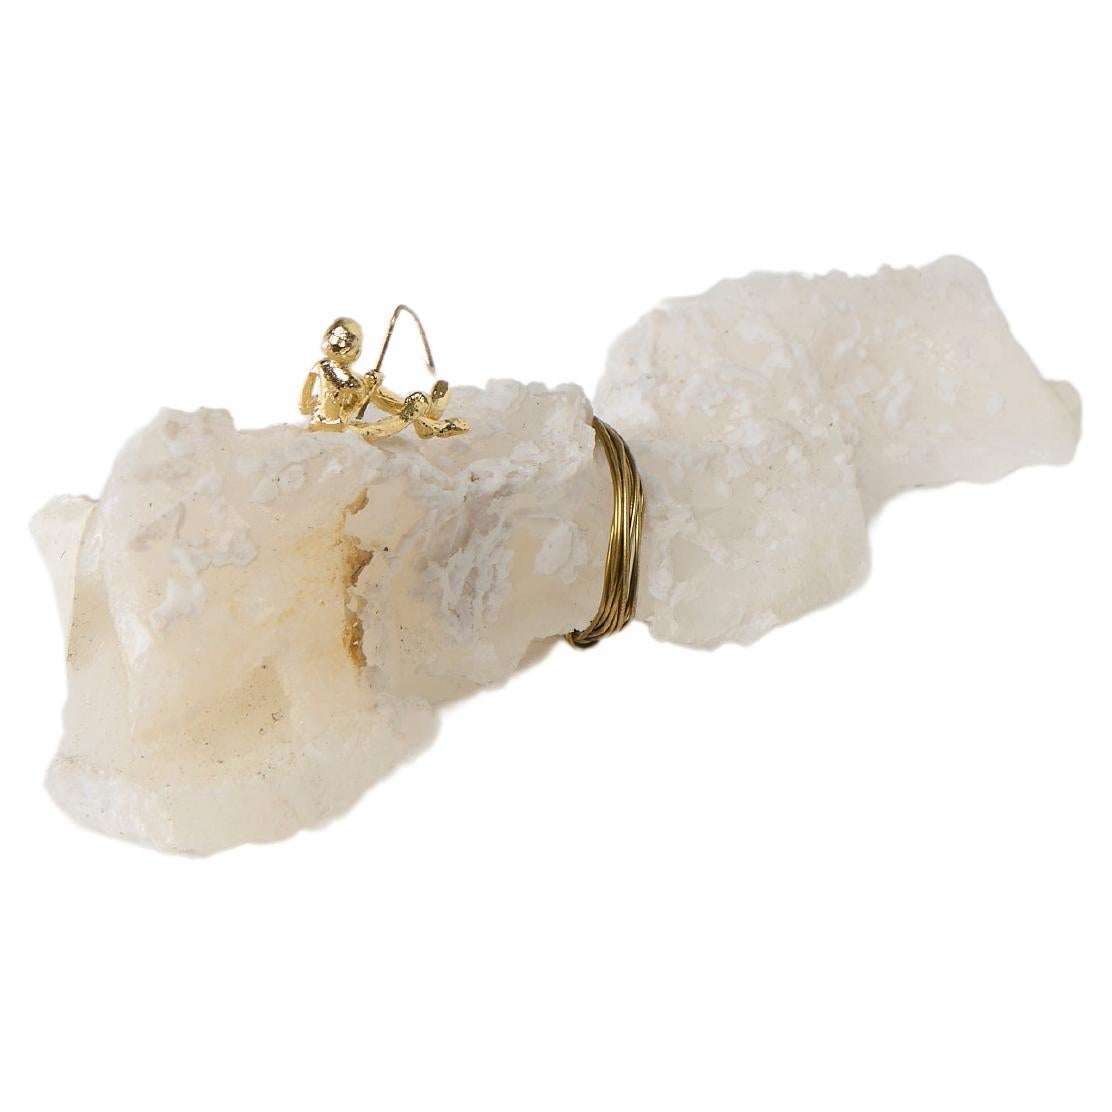 Pescador Series, N798 Calcite Fisherman Table Sculpture For Sale